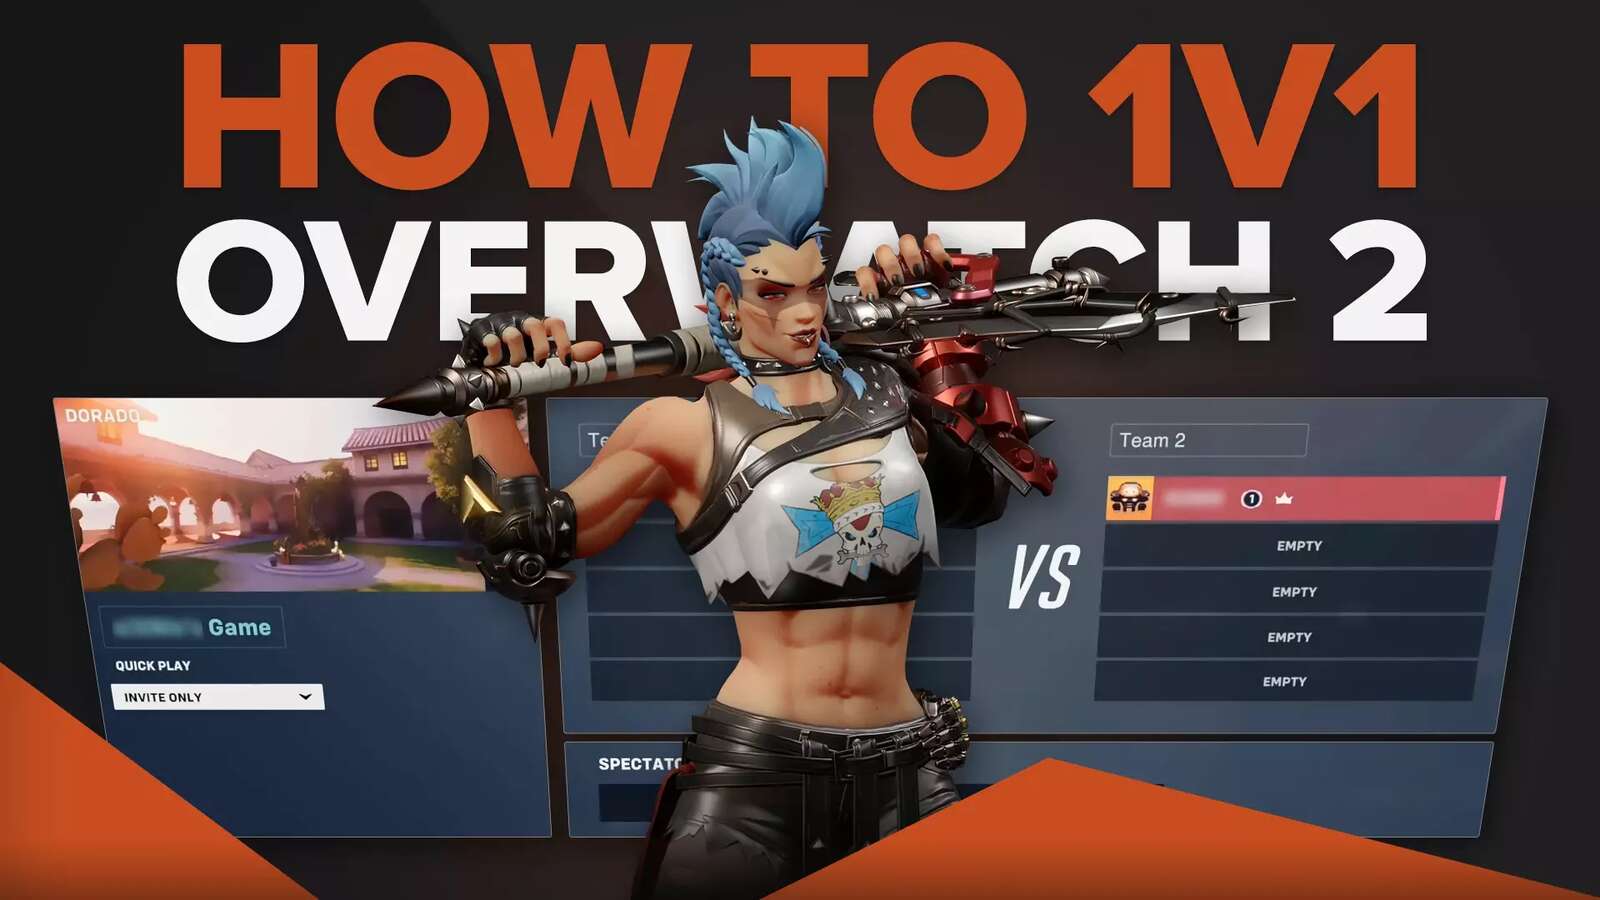 How to 1v1 in Overwatch 2